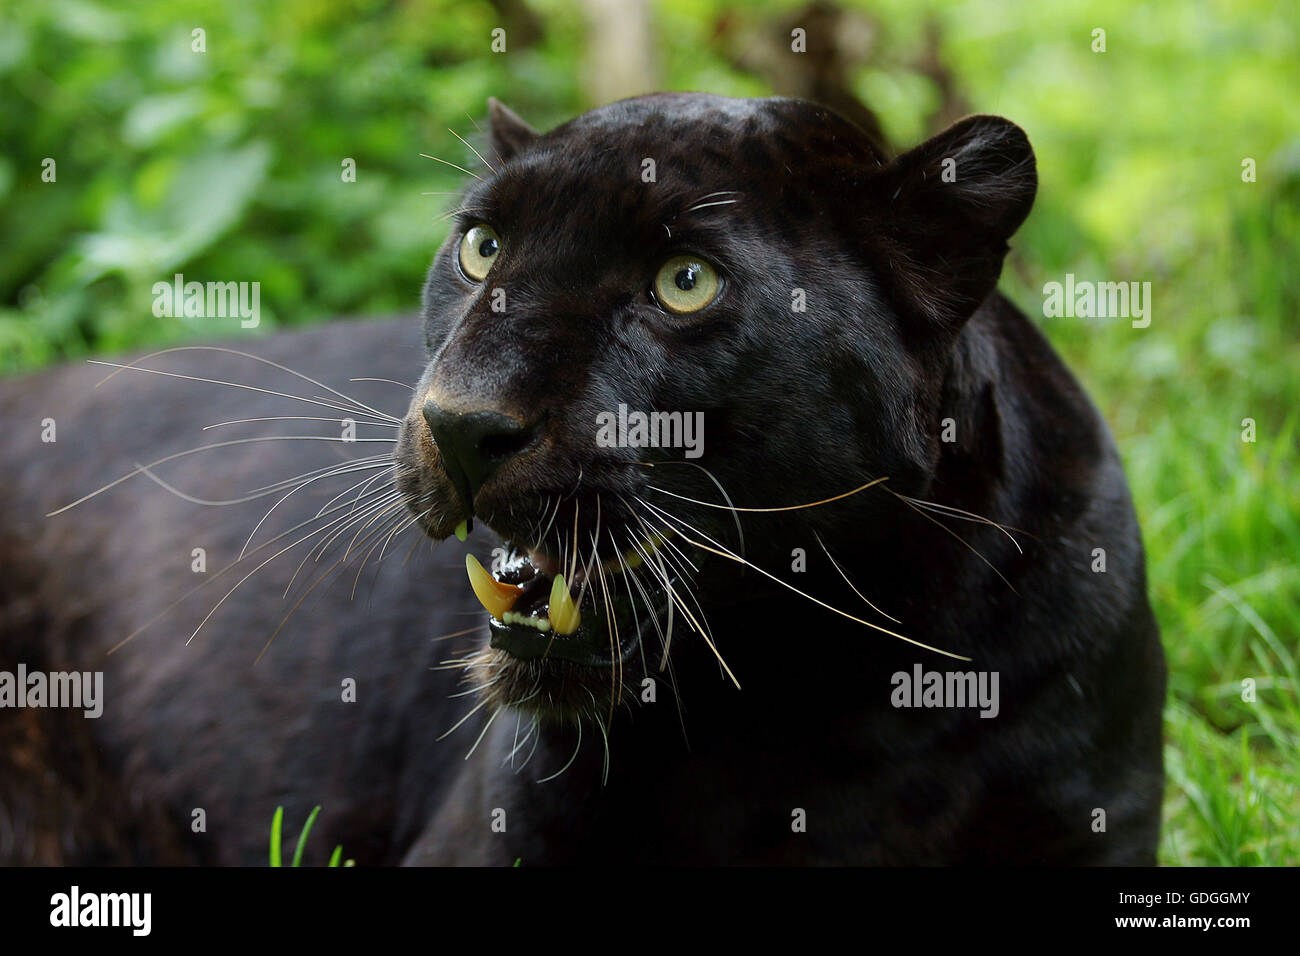 BLACK PANTHER panthera pardus, ADULT WITH OPEN MOUTH Stock Photo - Alamy